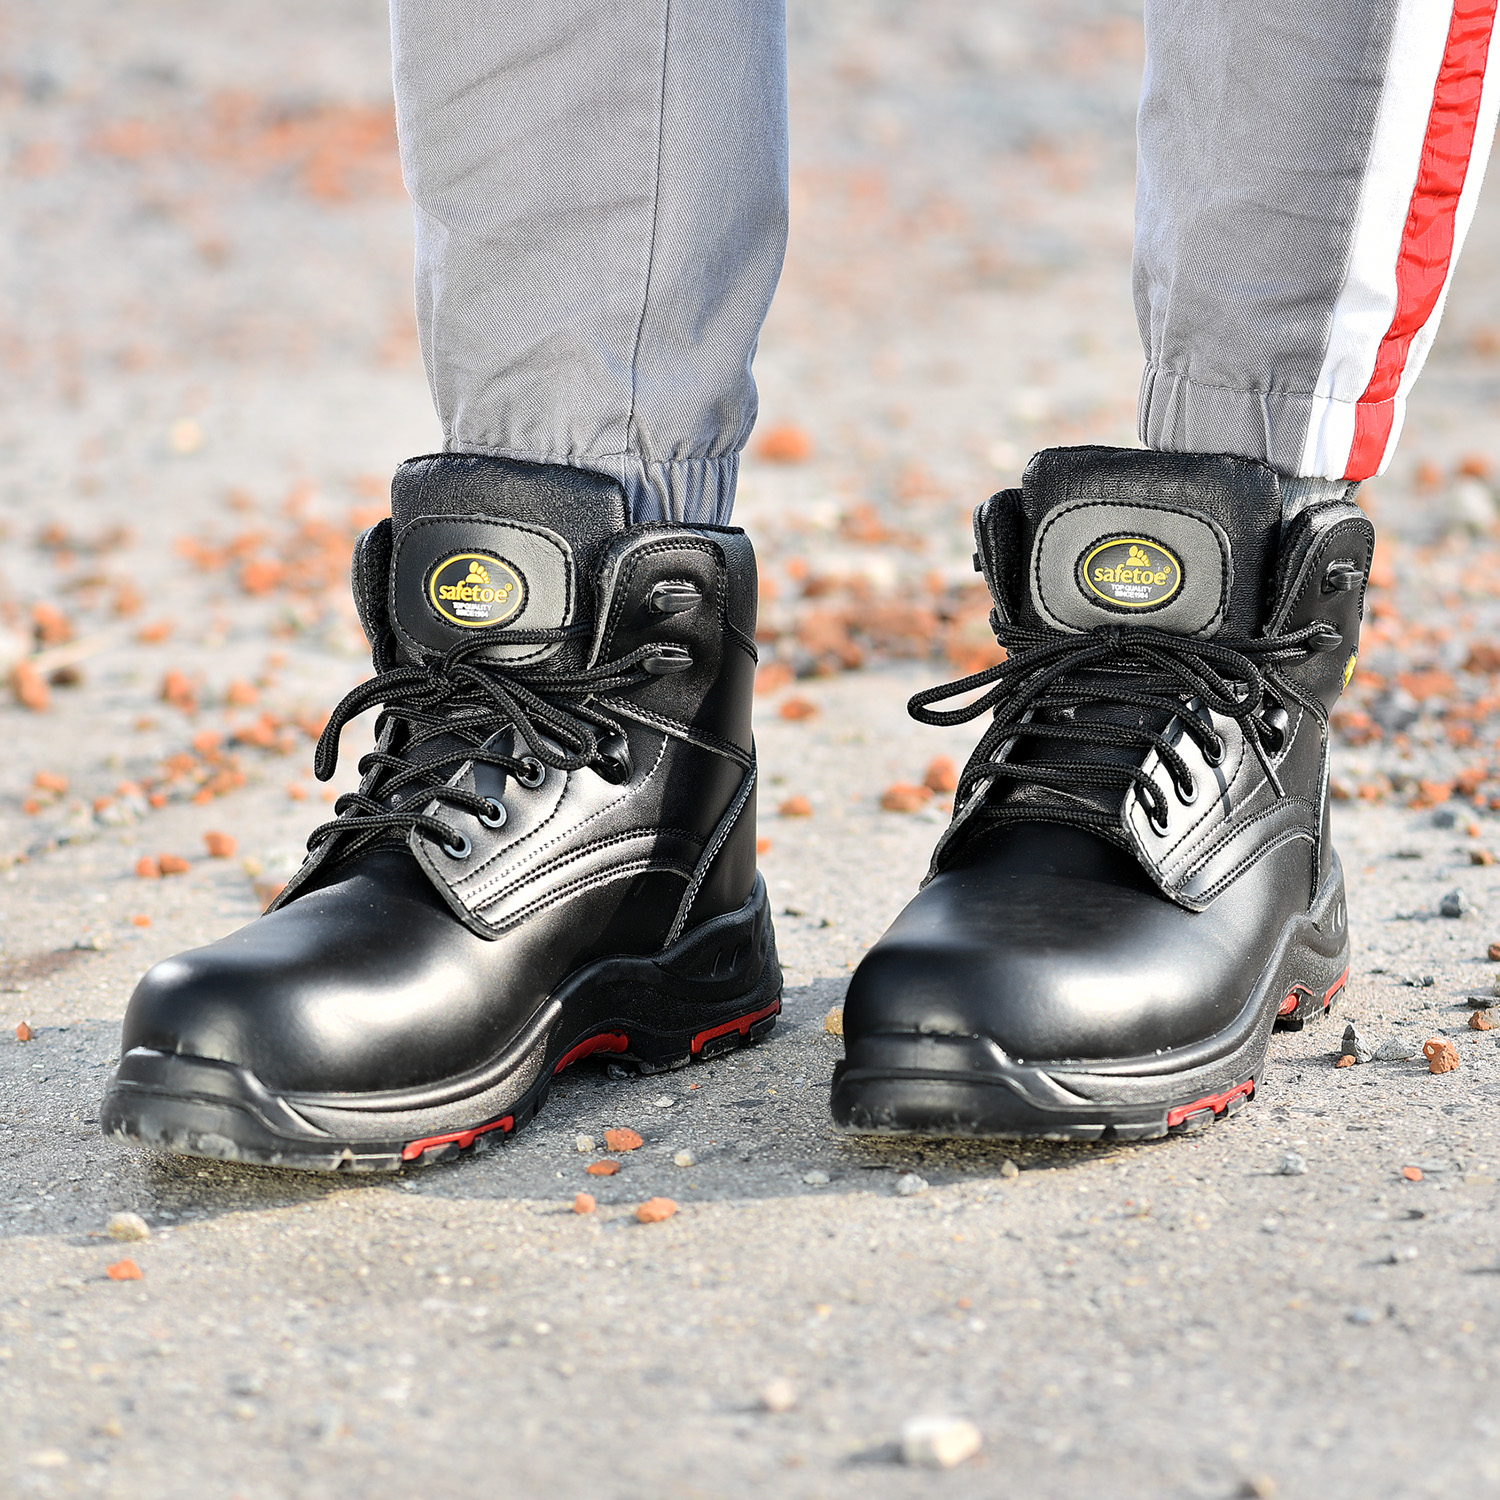 Electrical Hazard Insulation Rubber Eh Rated Safety Work Boots 